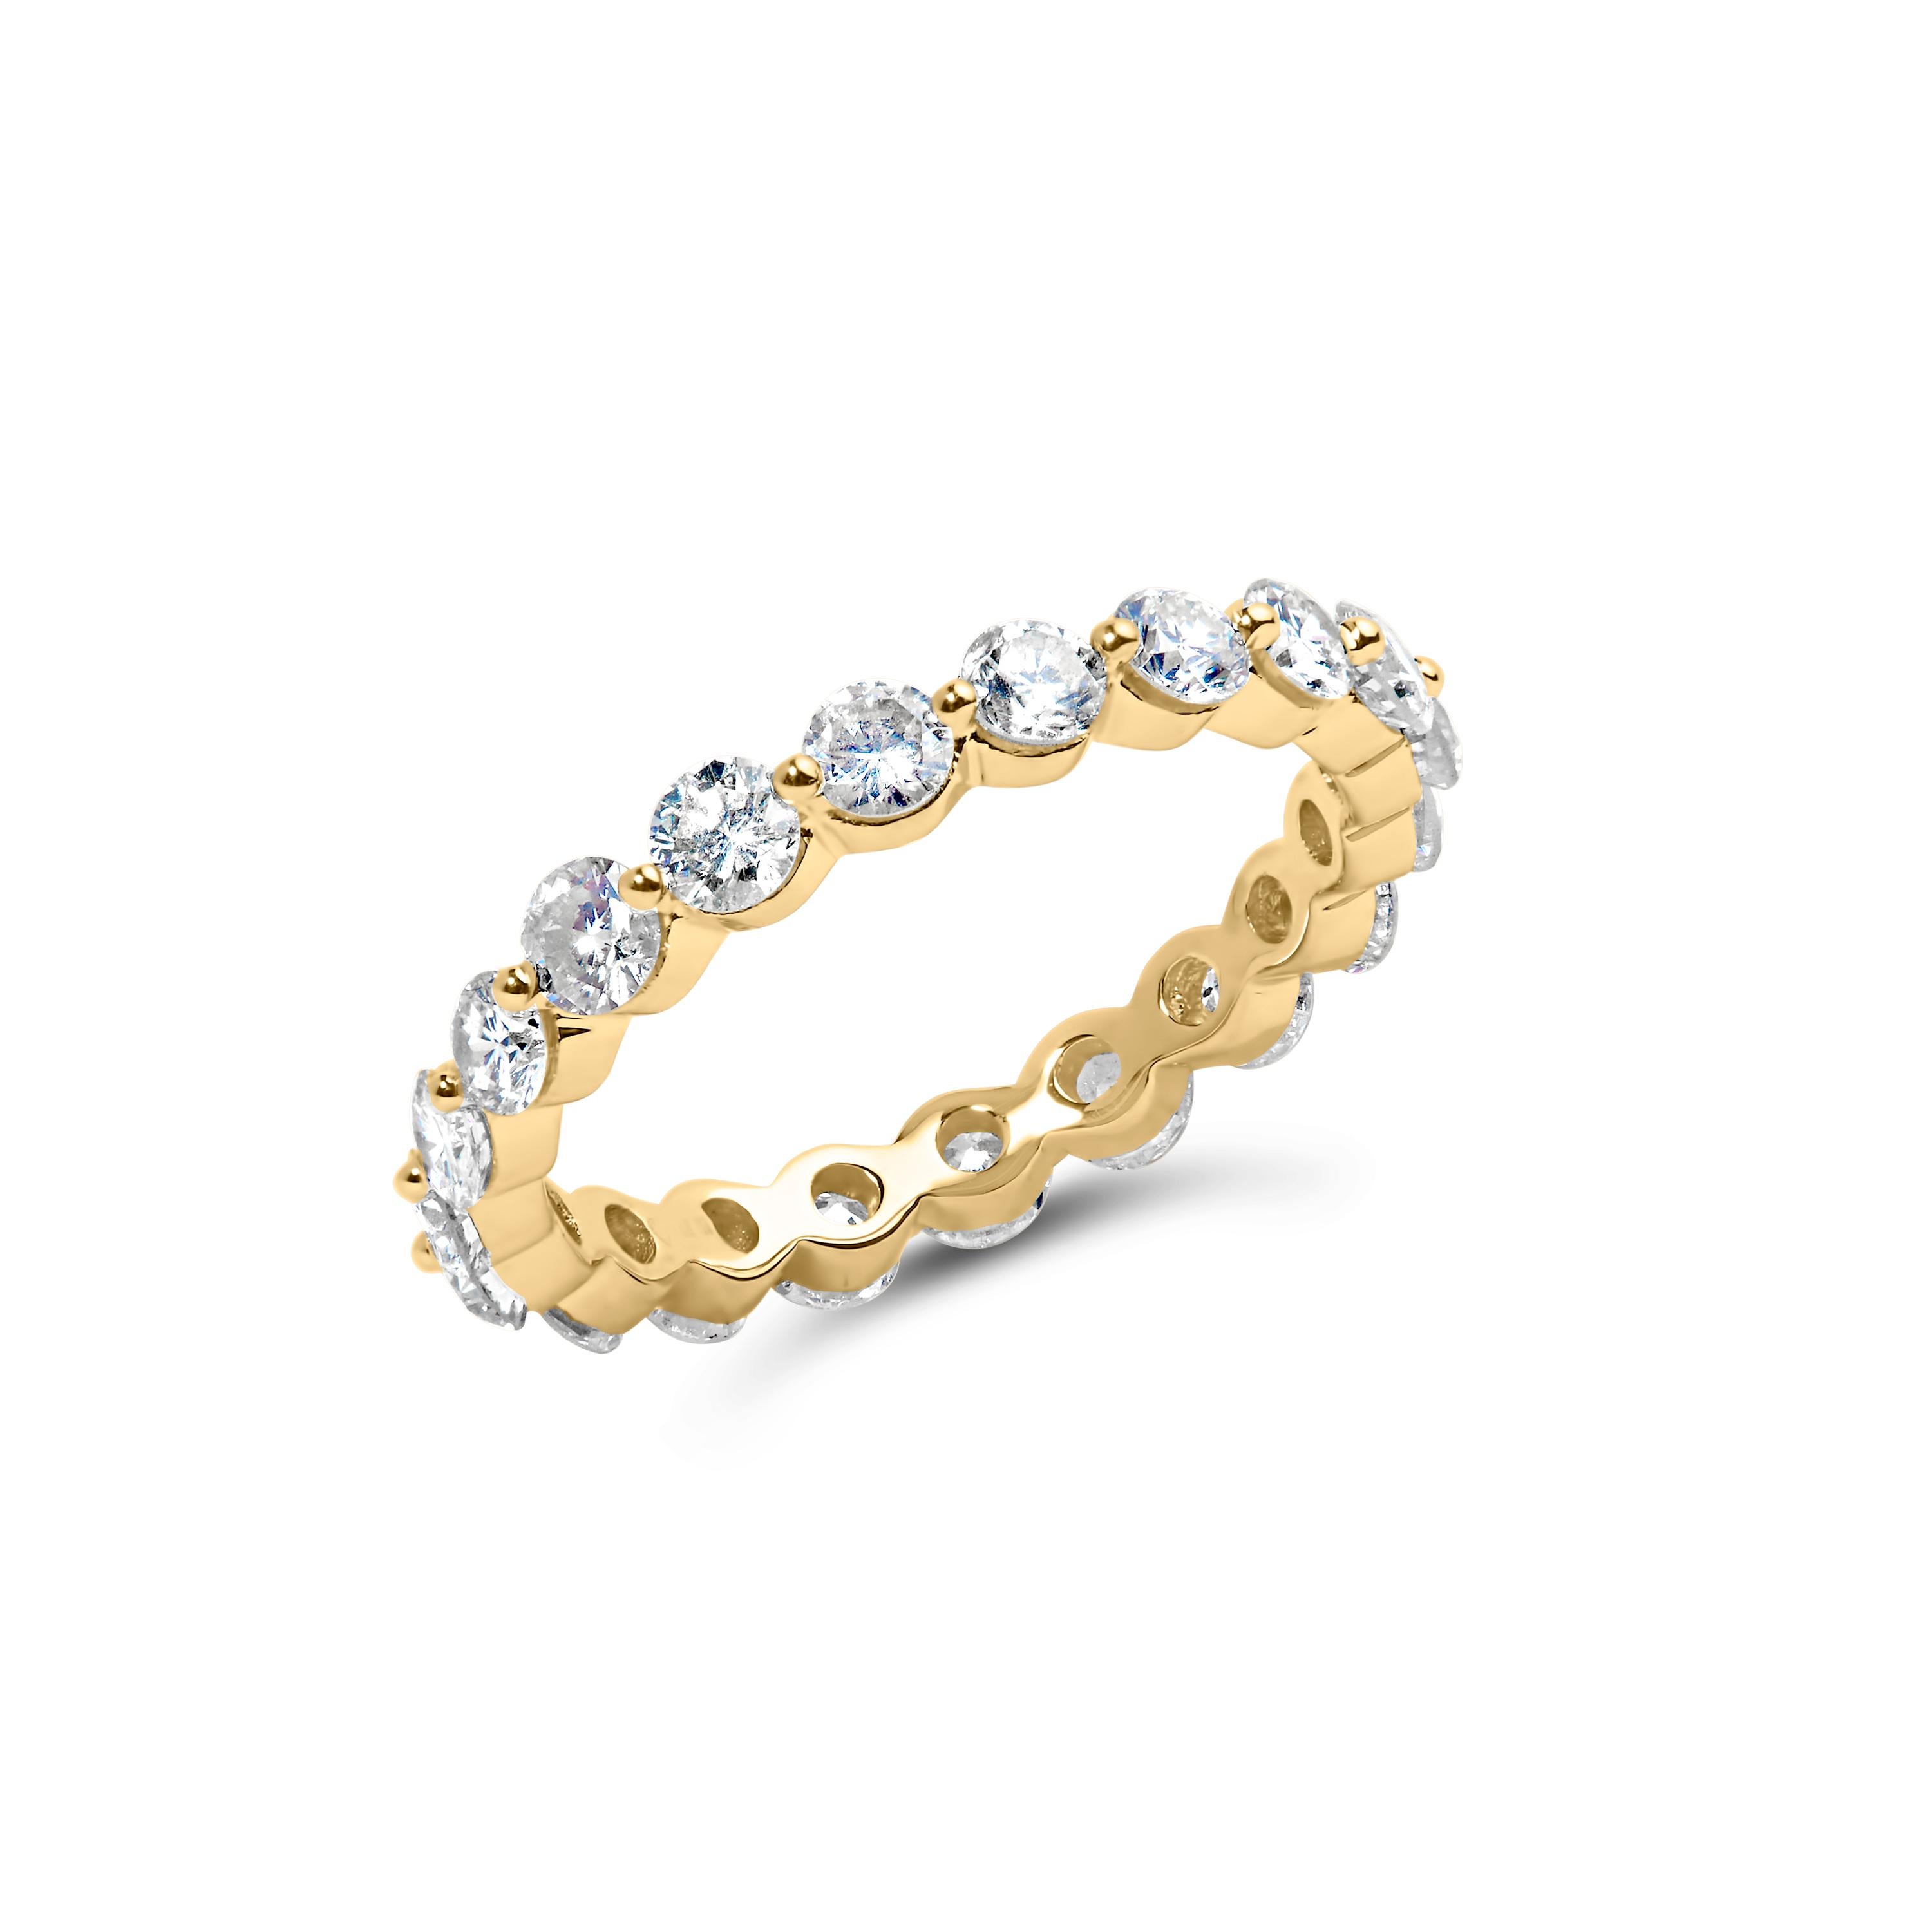 Introducing a mesmerizing masterpiece that will adorn your finger with timeless elegance. Crafted in 14K yellow gold, this enchanting eternity band ring is a symbol of eternal love and everlasting beauty. With a remarkable 2.0 cttw of 20 natural